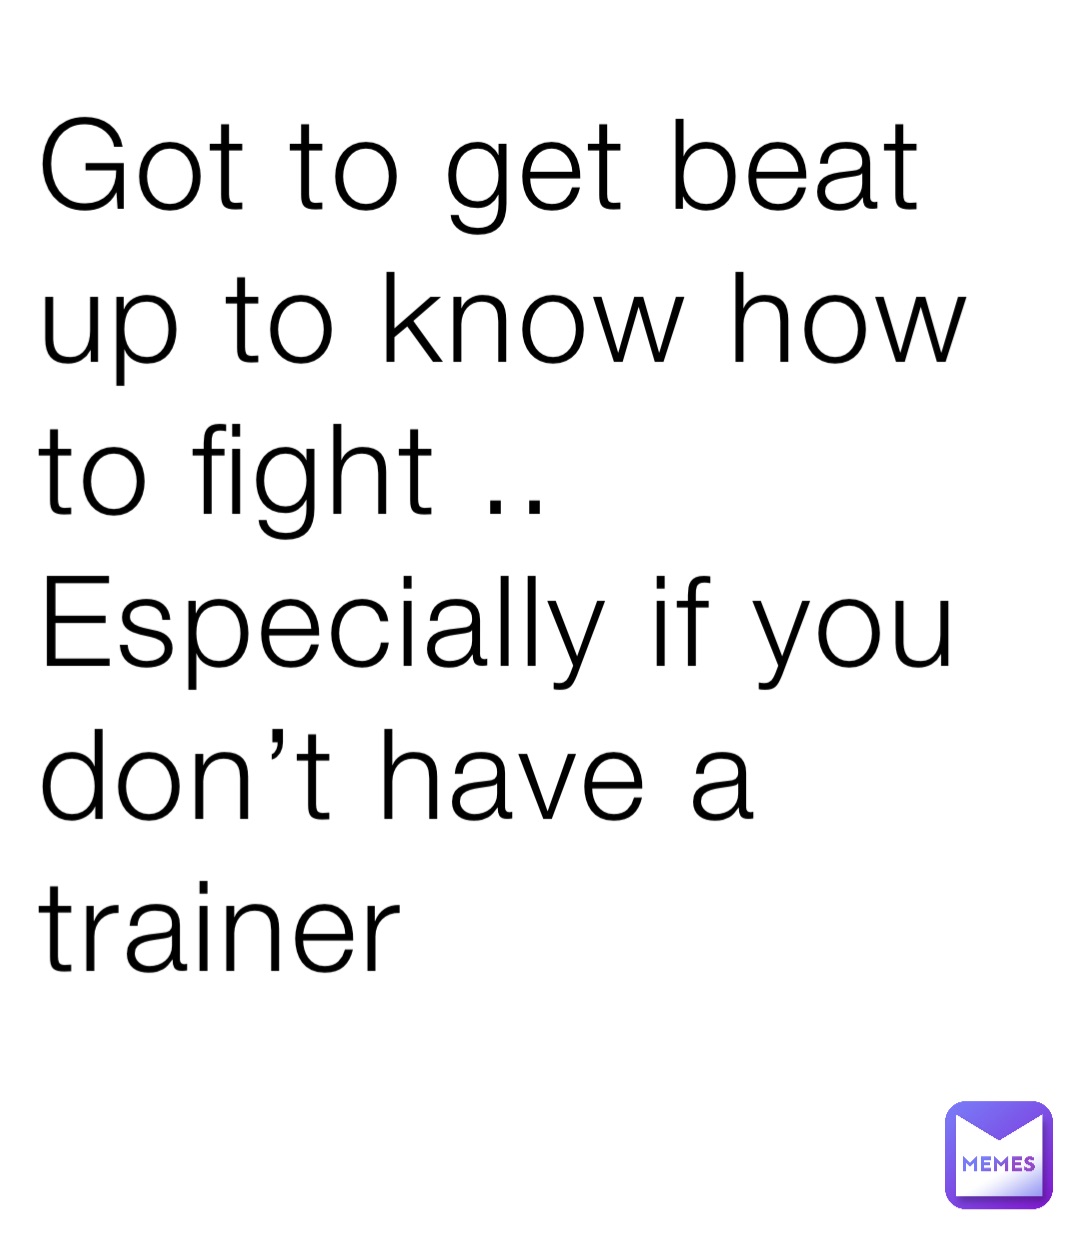 Got to get beat up to know how to fight ..
Especially if you don’t have a trainer